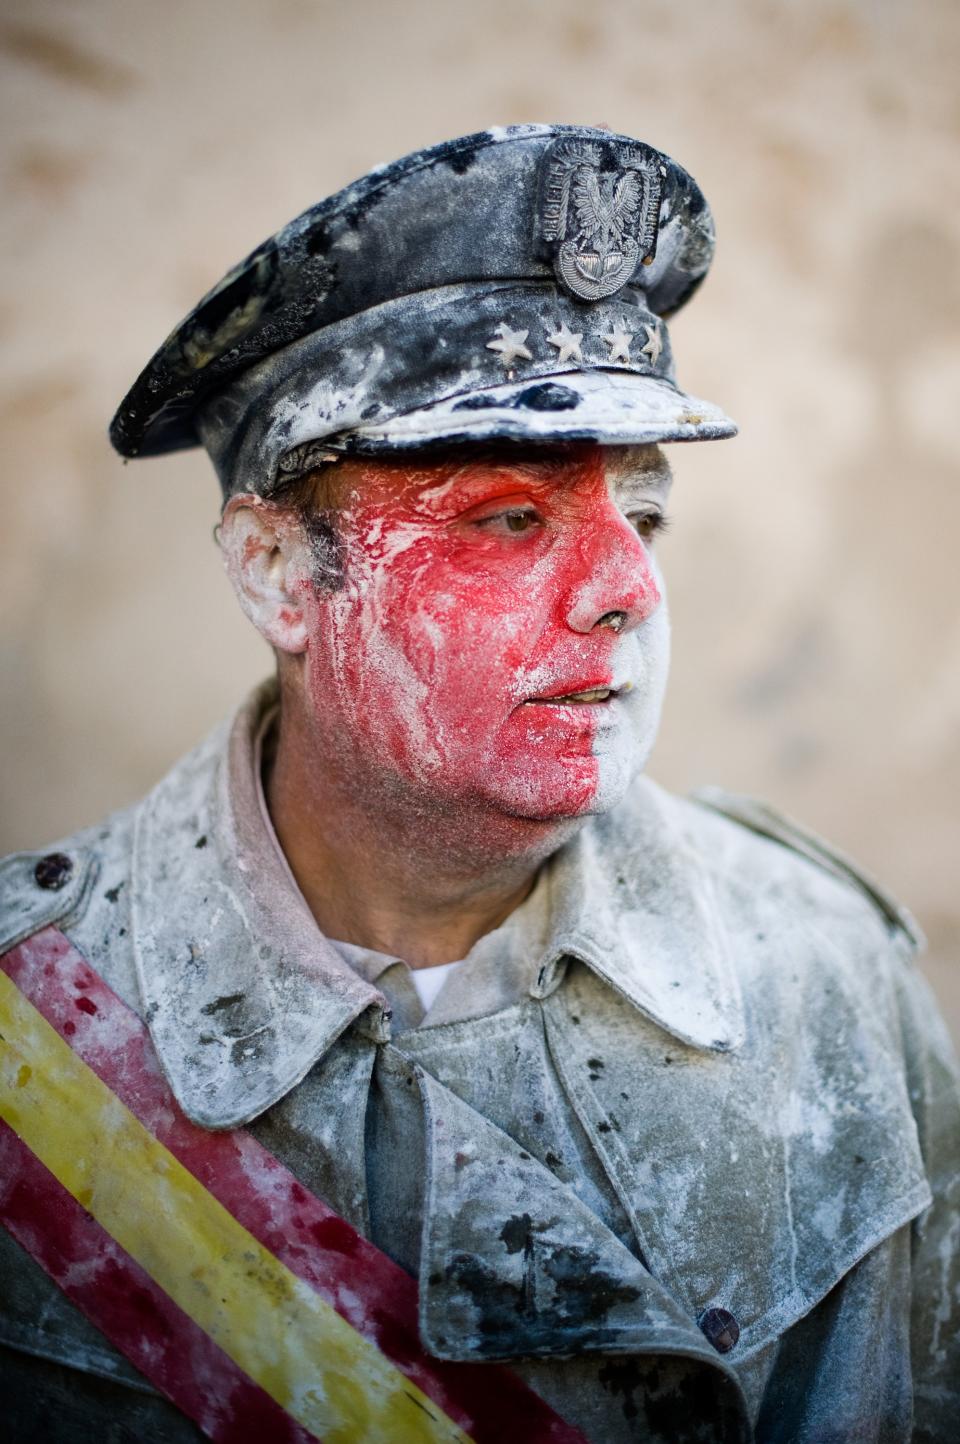 IBI, SPAIN - DECEMBER 28: A Reveller poses after taking part in the battle of 'Enfarinats', a flour fight in celebration of the Els Enfarinats festival on December 28, 2012 in Ibi, Spain. Citizens of Ibi annually celebrate the festival with a battle using flour, eggs and firecrackers. The battle takes place between two groups, a group of married men called 'Els Enfarinats' which take the control of the village for one day pronouncing a whole of ridiculous laws and fining the citizens that infringe them and a group called 'La Oposicio' which try to restore order. At the end of the day the money collected from the fines is donated to charitable causes in the village. The festival has been celebrated since 1981 after the town of Ibi recovered the tradition but the origins remain unknown. (Photo by David Ramos/Getty Images)